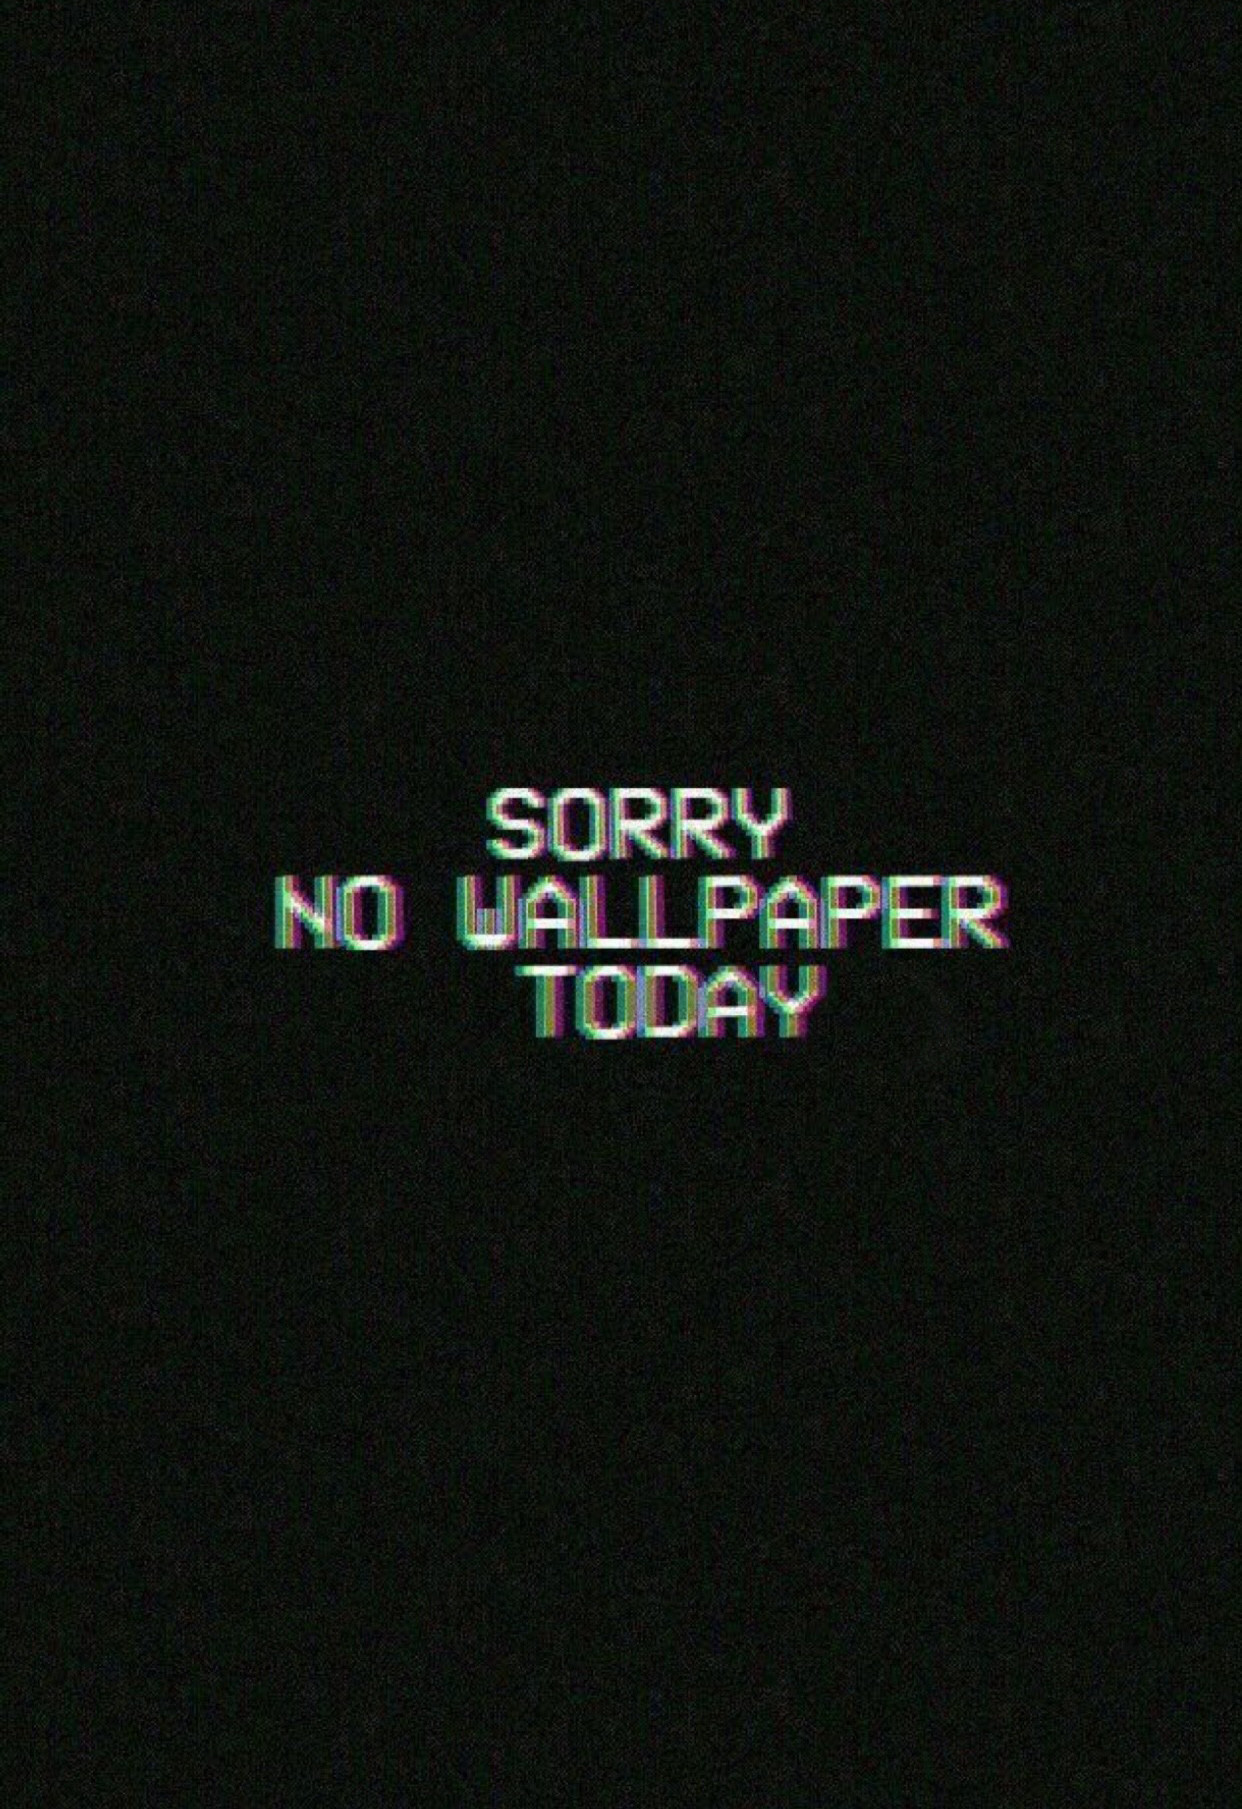 Download No Wallpaper by hanymaxasy  ad  Free on ZEDGE now Browse  millions of popular 2018 Wallpaper  Dark wallpaper iphone Glitch  wallpaper Black wallpaper